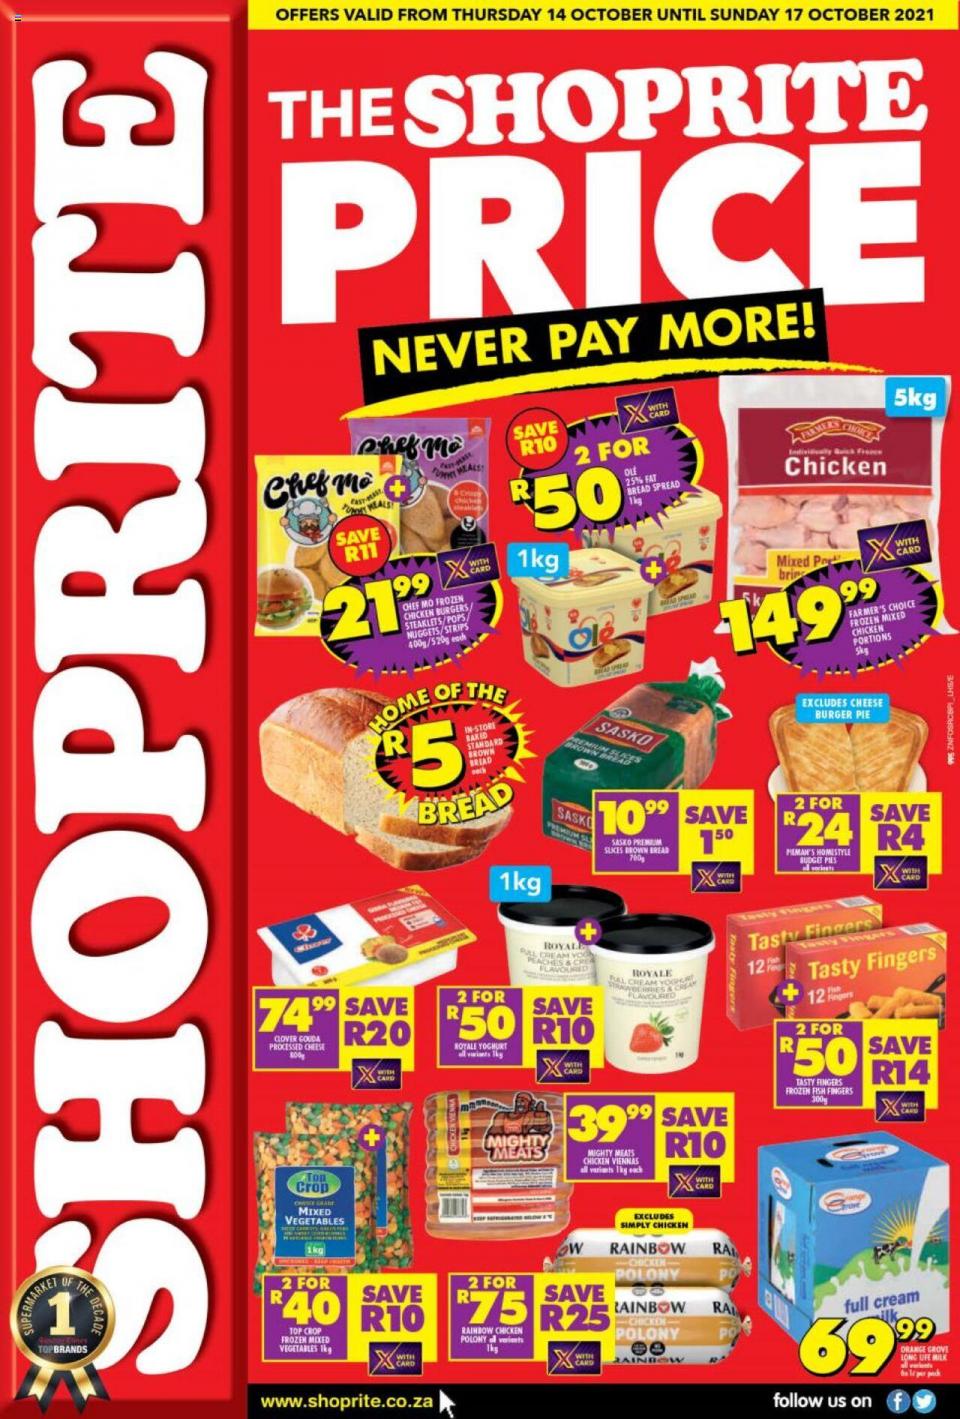 Shoprite Specials Never Pay More 14 – 17 October 2021